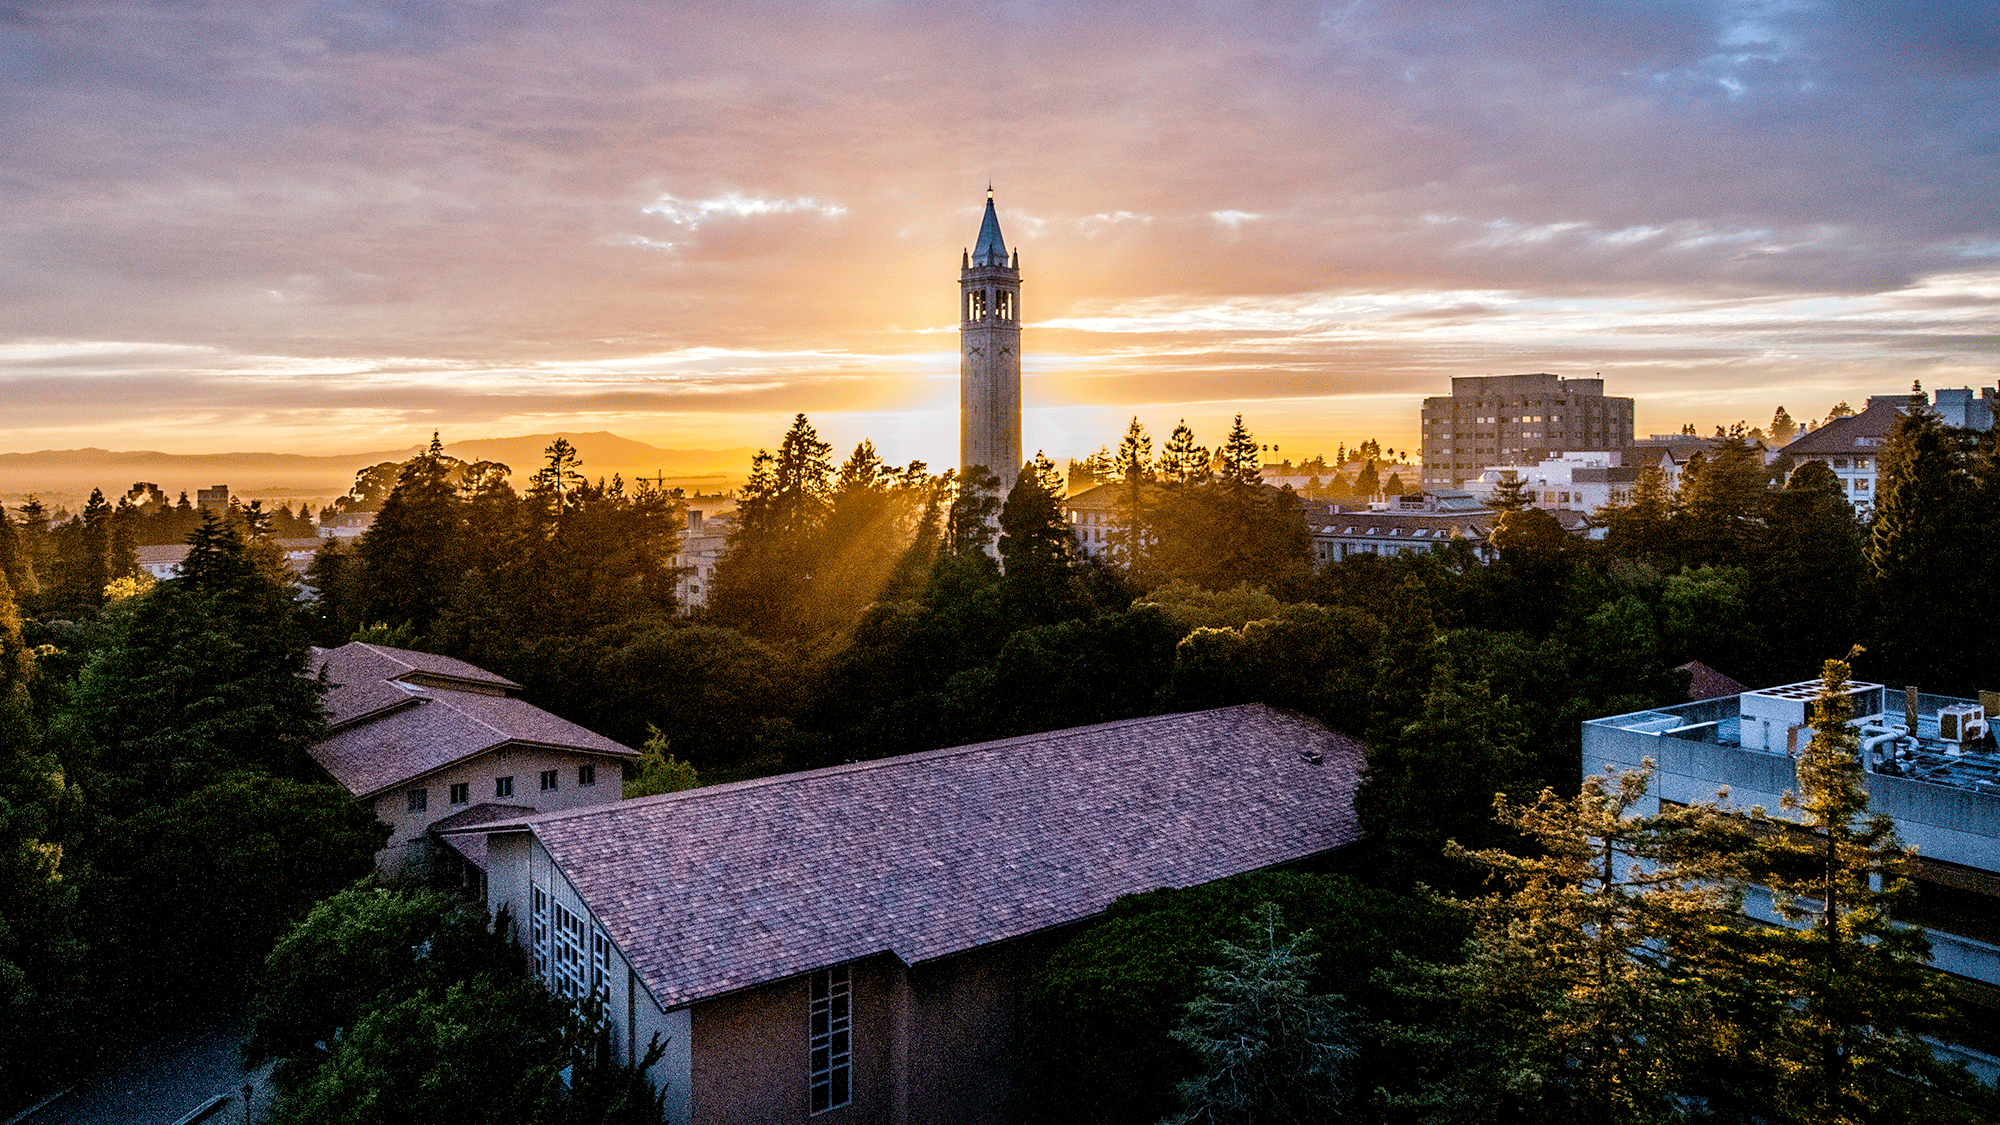 A photo overlooking the rooftops of the Berkeley Campus at dusk. In the center of the photo, the sun is setting behind the campanile.